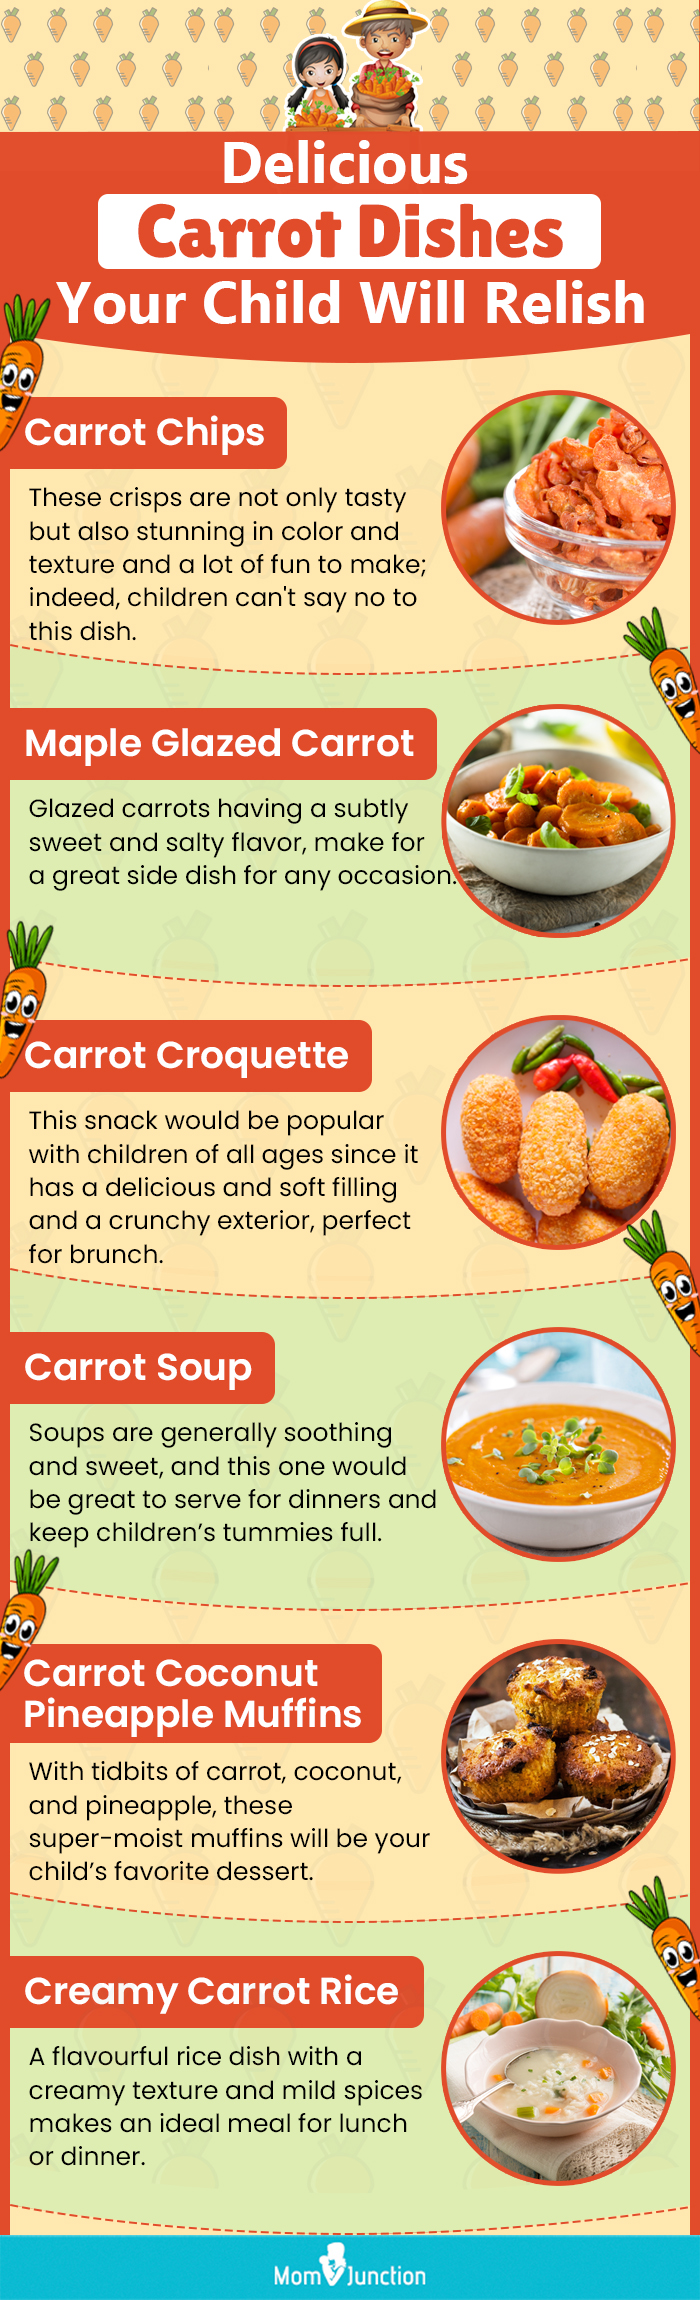 delicious carrot dishes your child will relish (infographic)